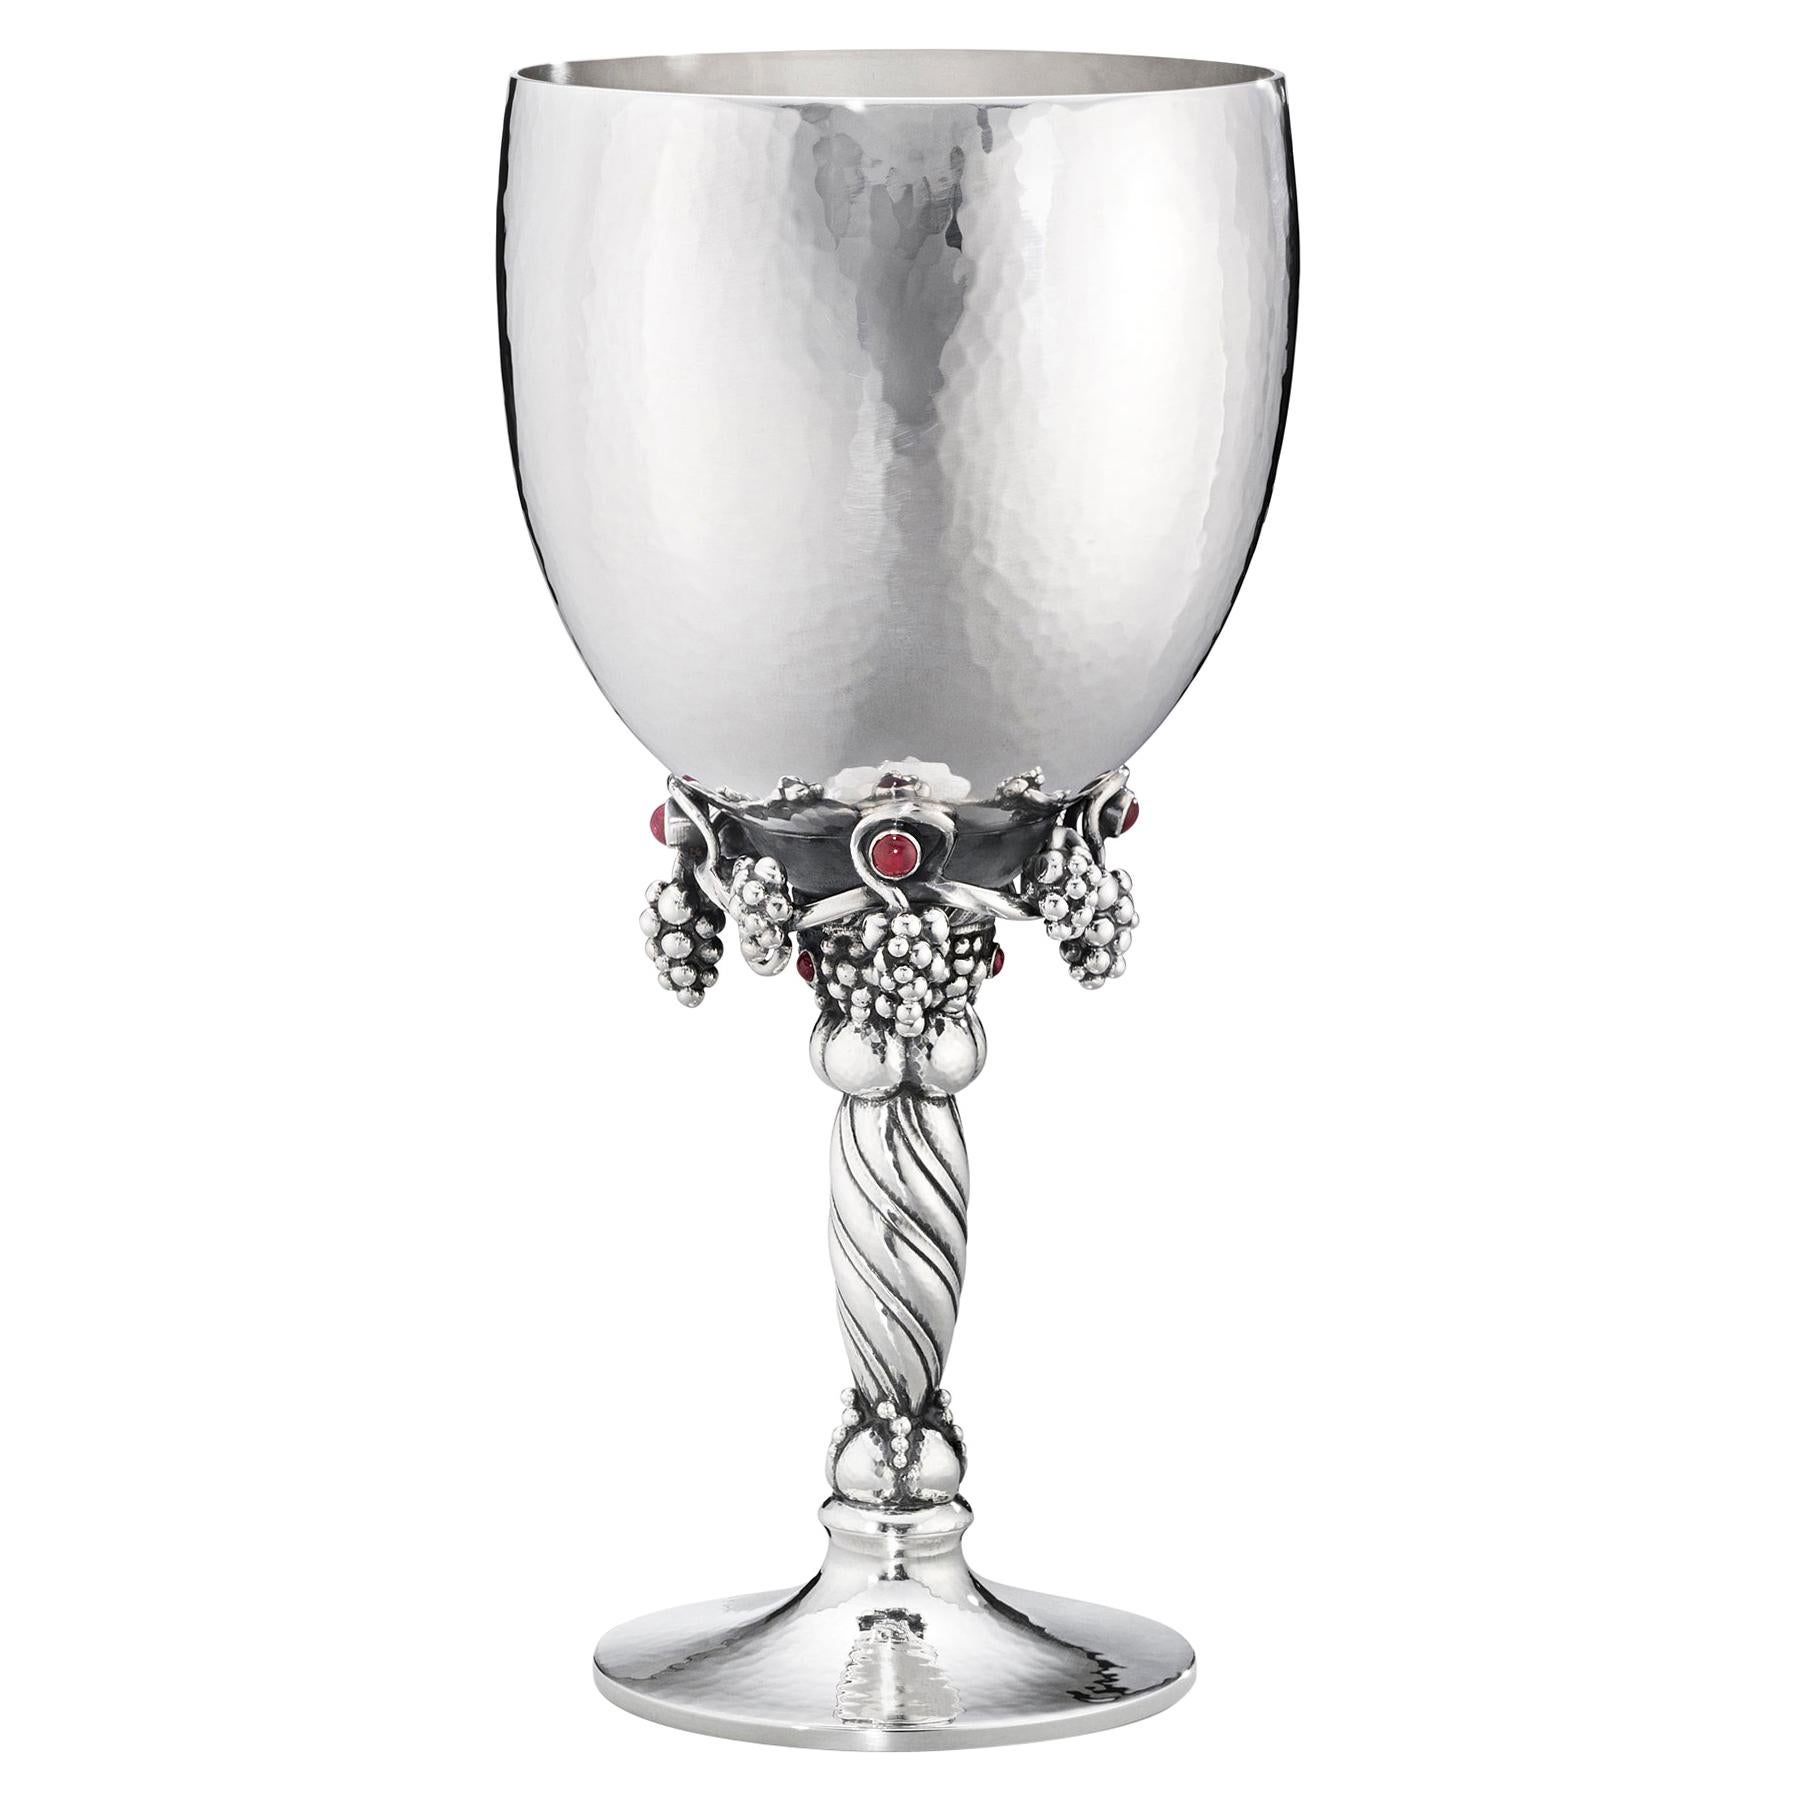 Georg Jensen 263A Handcrafted Sterling Silver Goblet with Rubies and Grape Motif For Sale